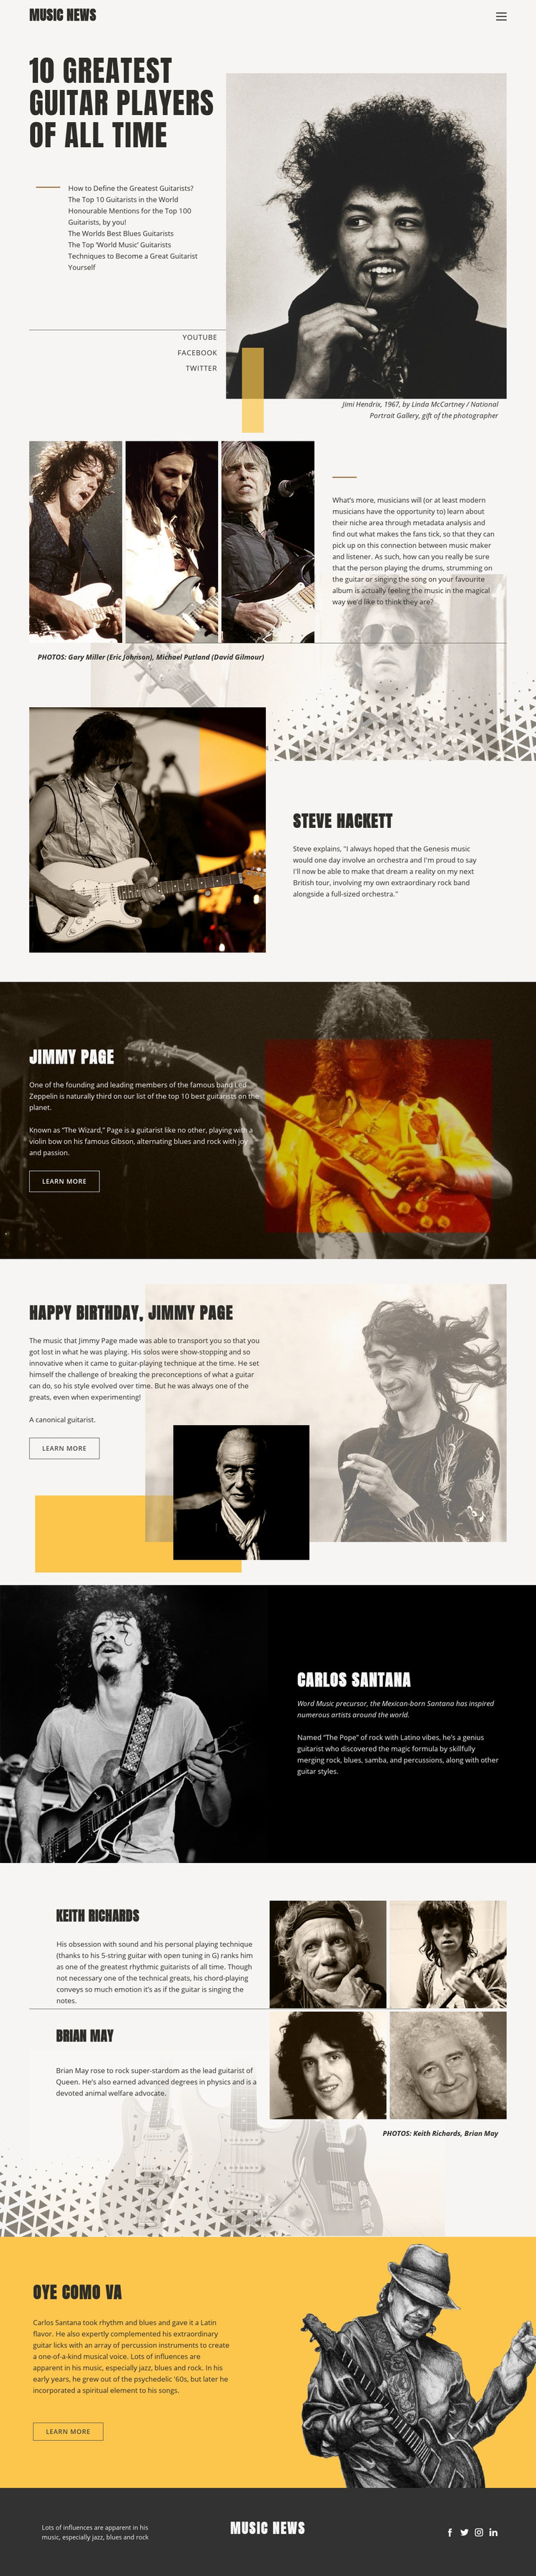 The Top Guitar Players Homepage Design